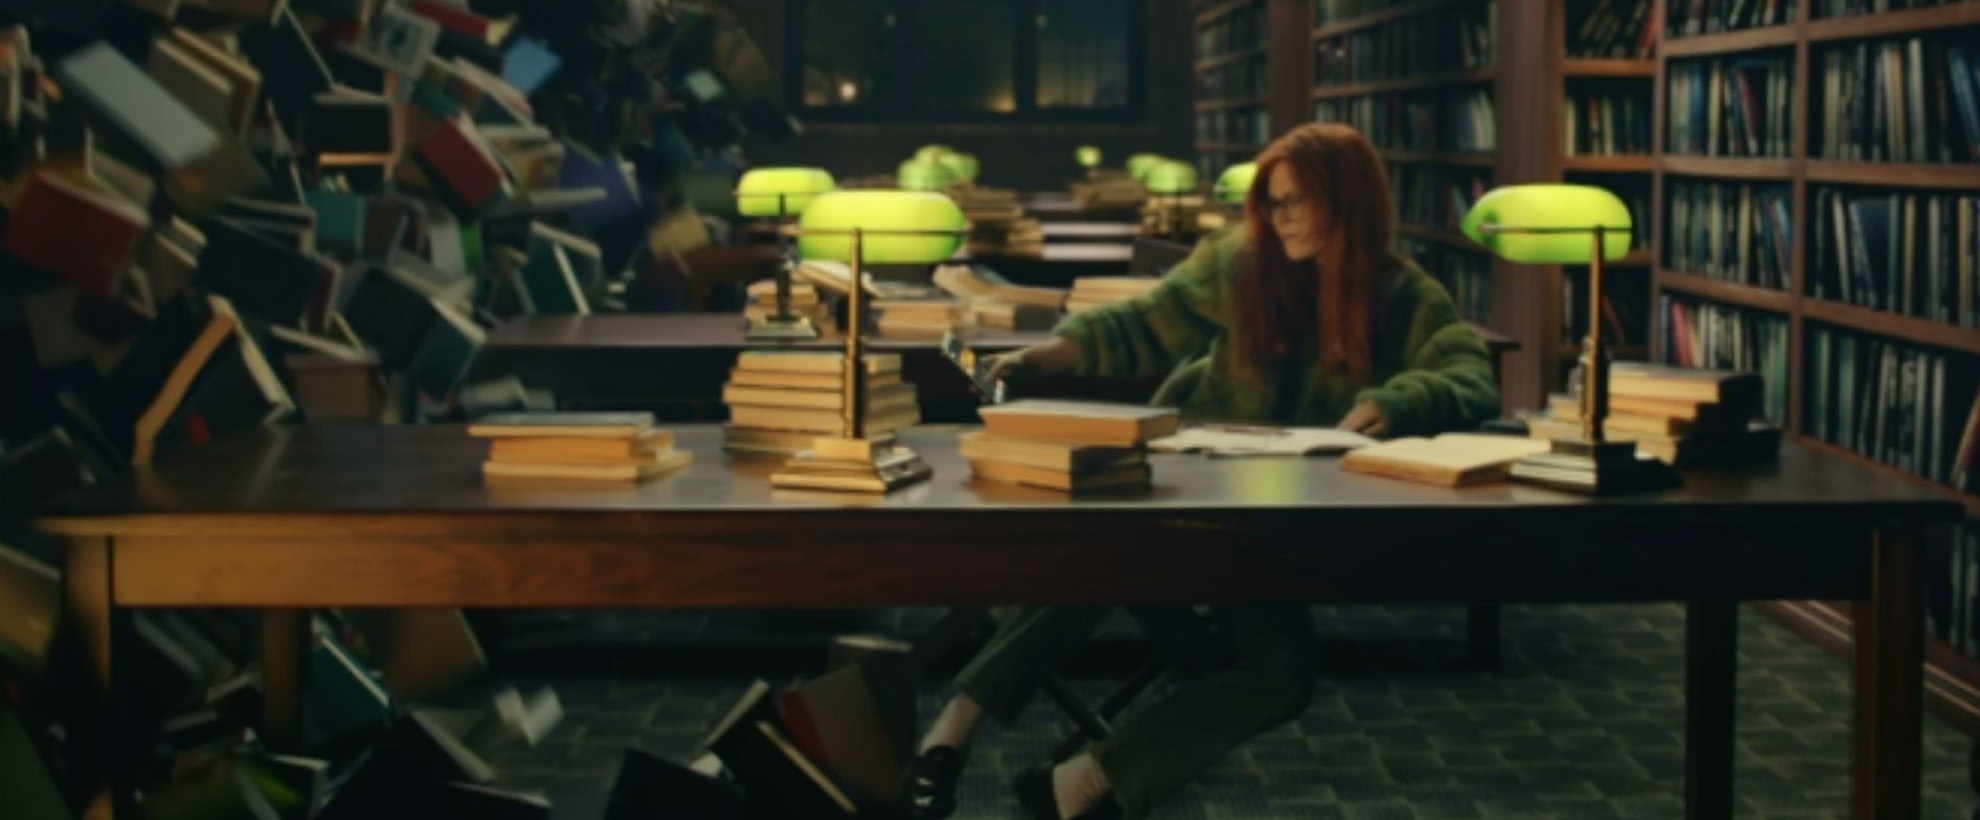 A woman in a green jumper sitting at a desk in a library. There are books falling down from the shelves towards her.